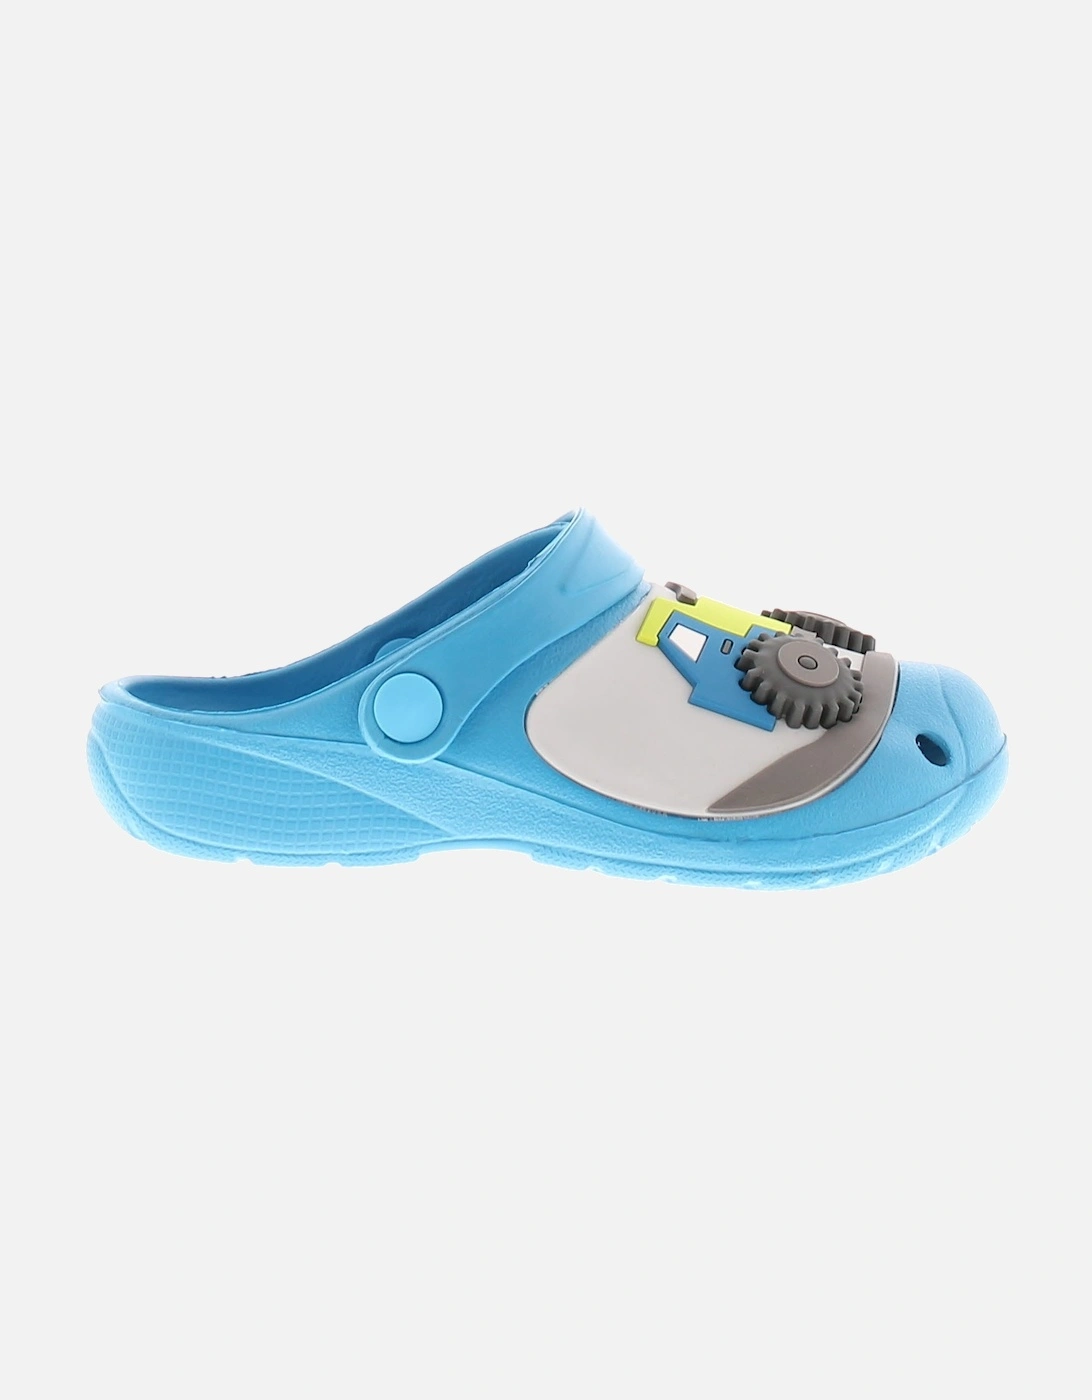 Younger Childrens Sandals Clogs Breach Truck blue UK Size